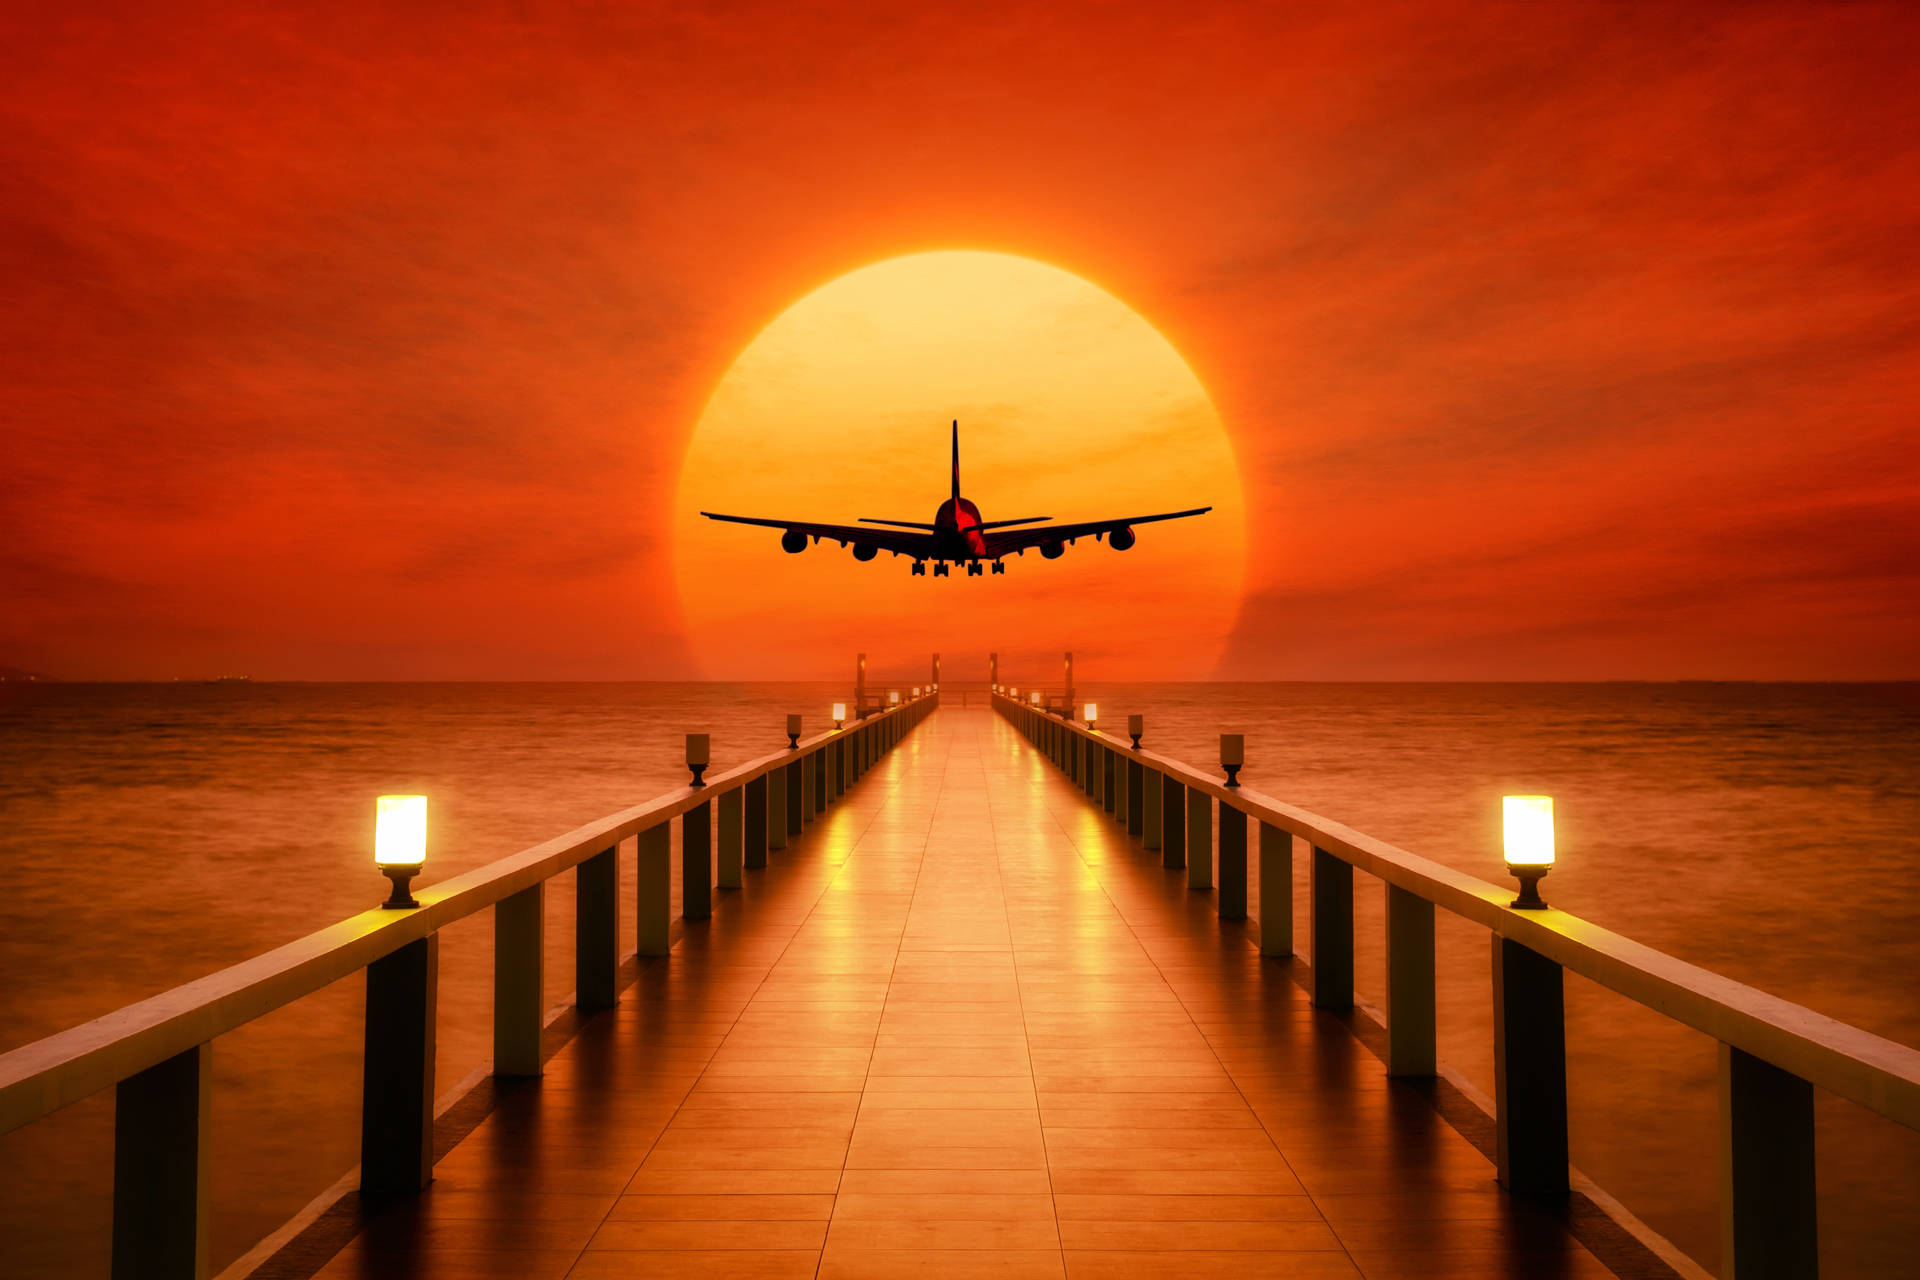 Airplane flying over a wharf wallpaper